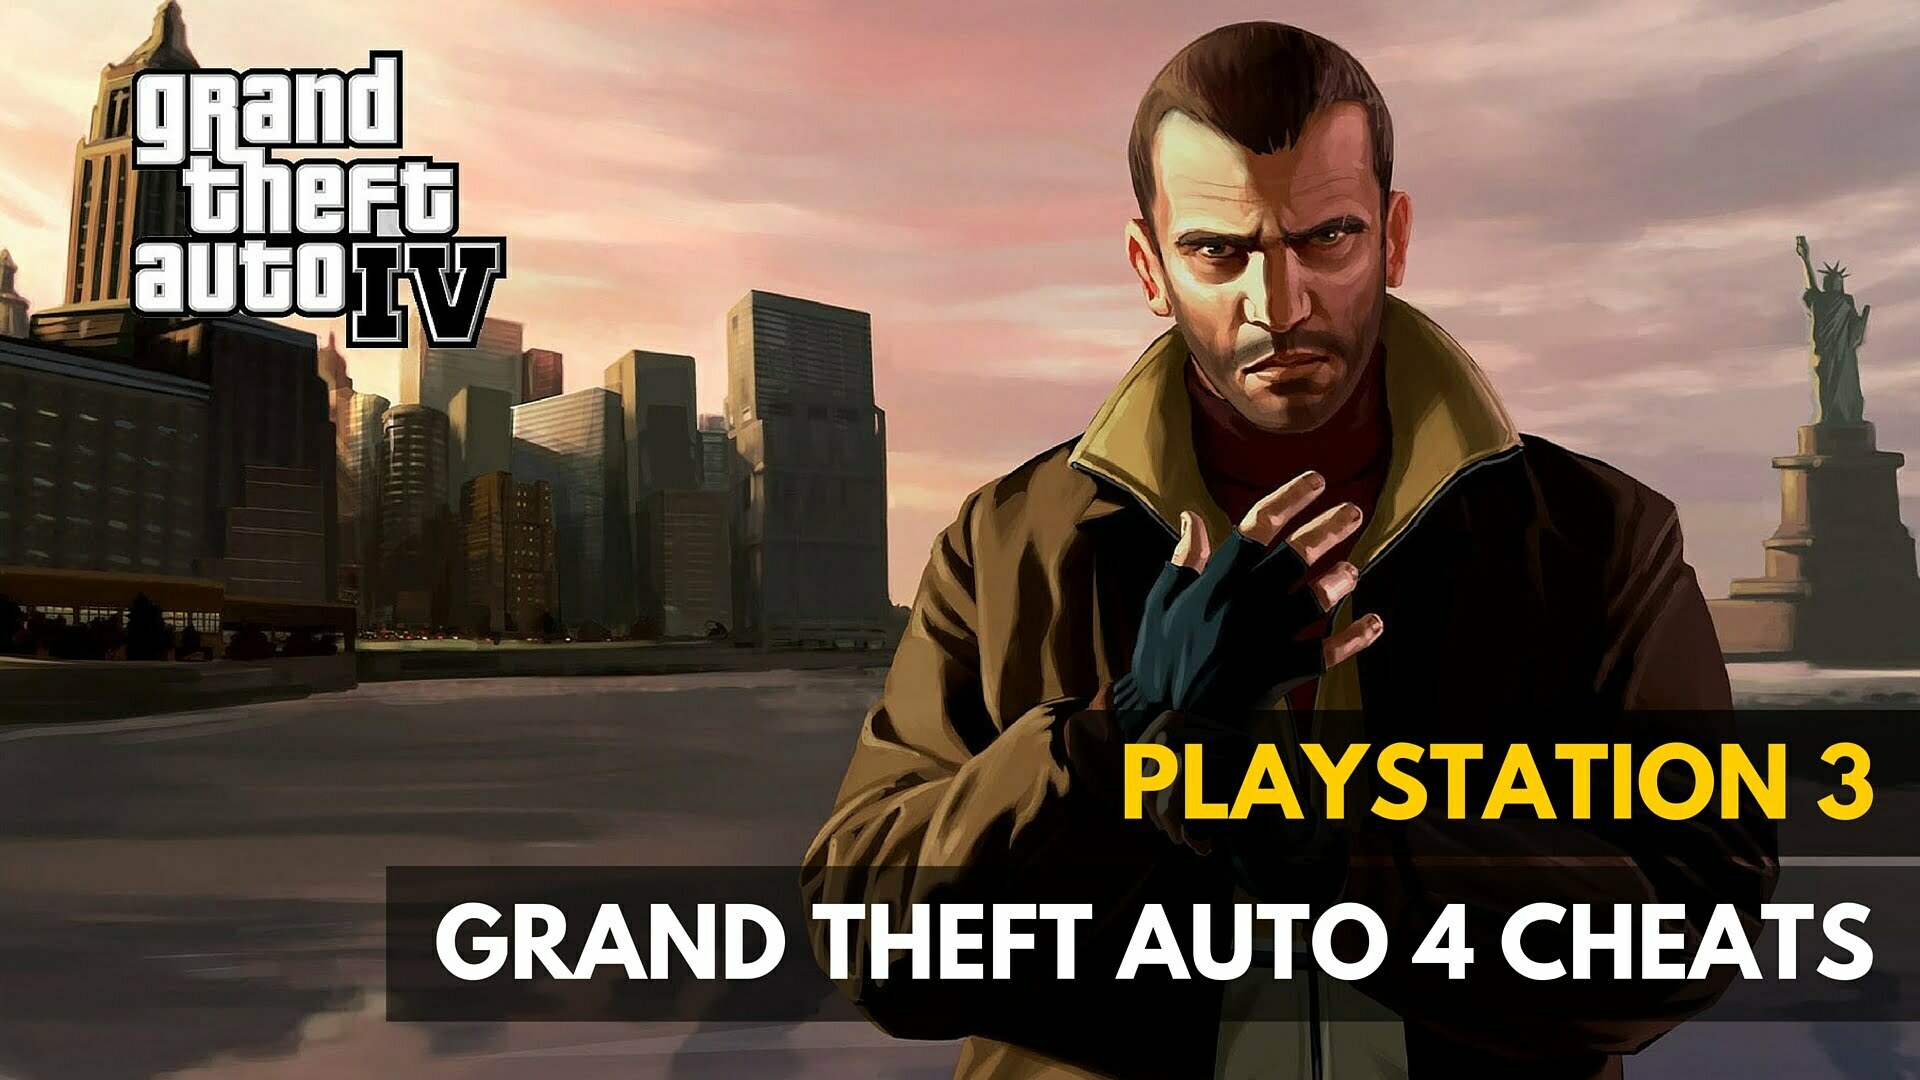 Grand Theft Auto 4 Cheats for Playstation 3